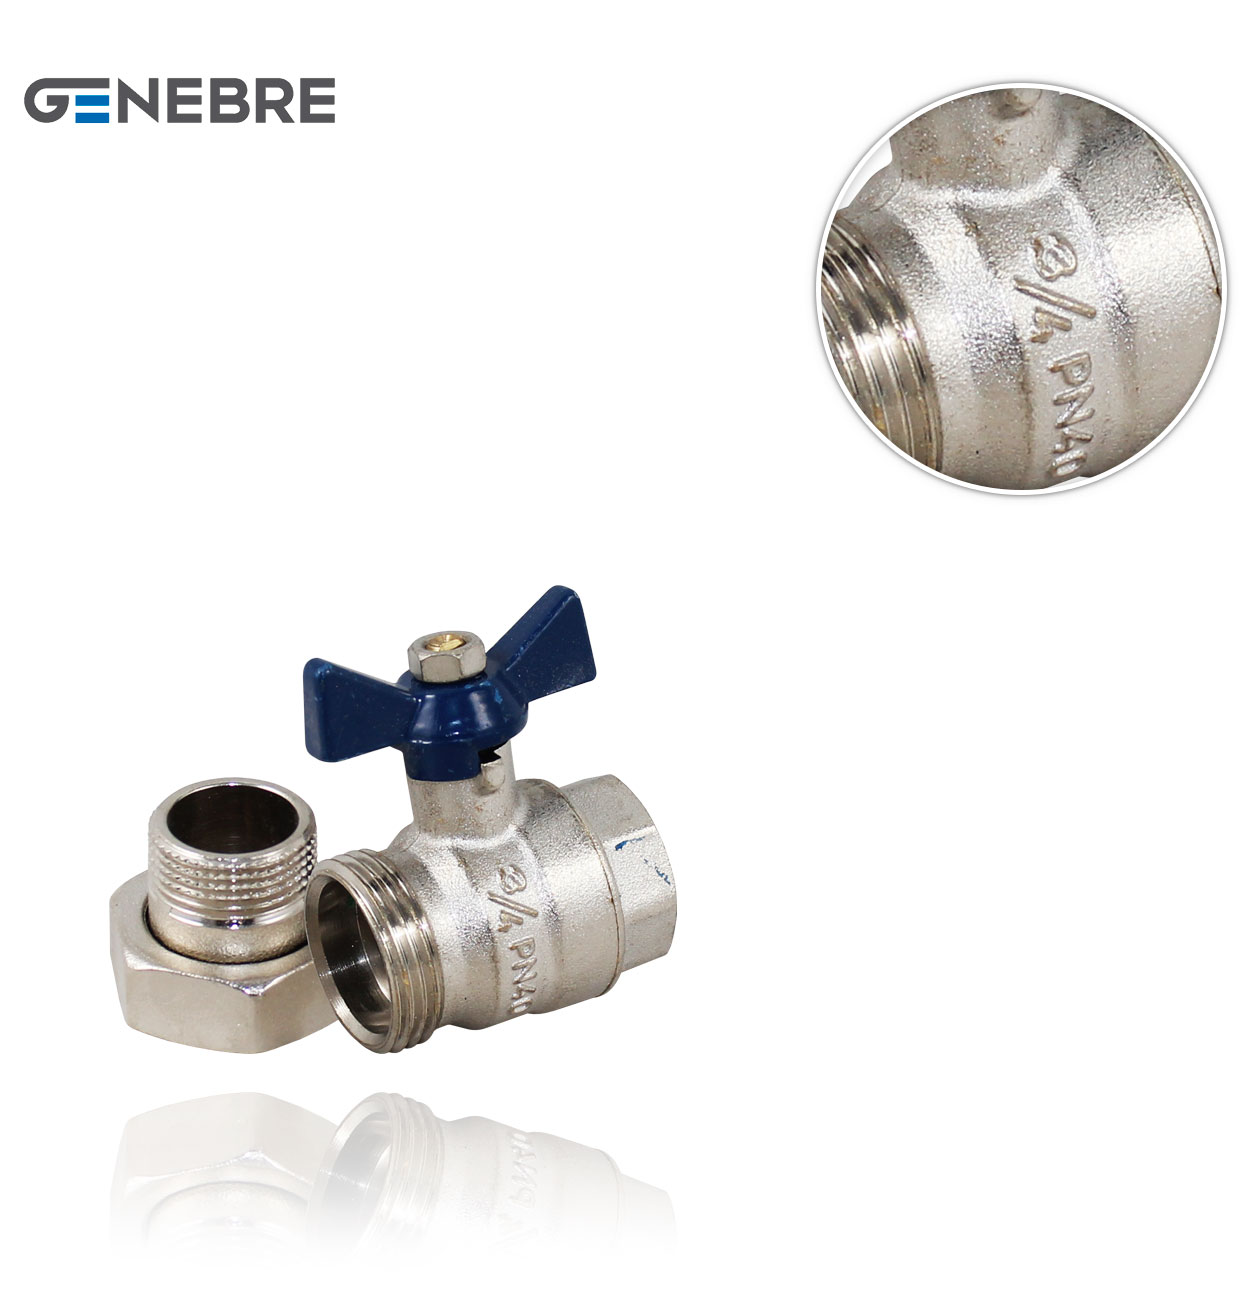 MH R3/4" GENEBRE BALL VALVE, WING NUT W/CONNECTOR PN25